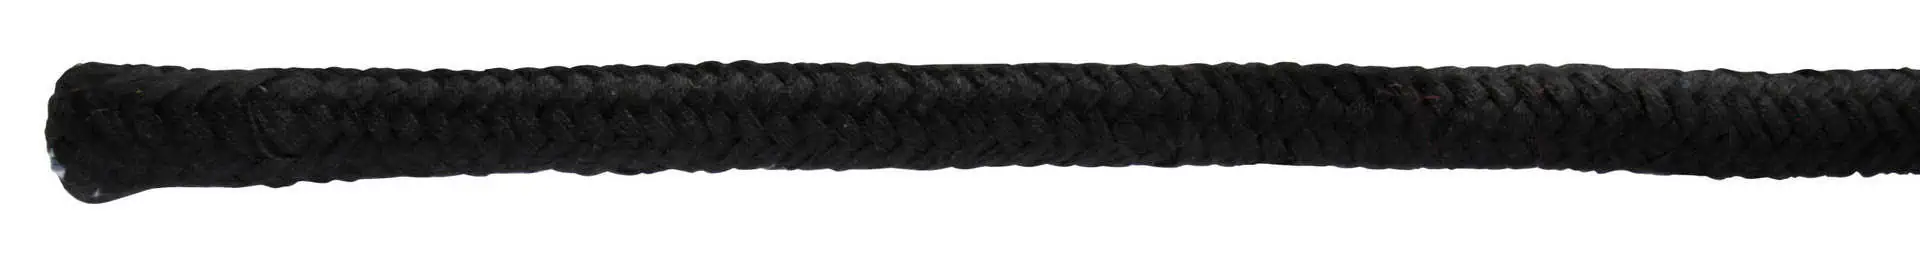 Lead rope cotton black 2 m, with snap hook